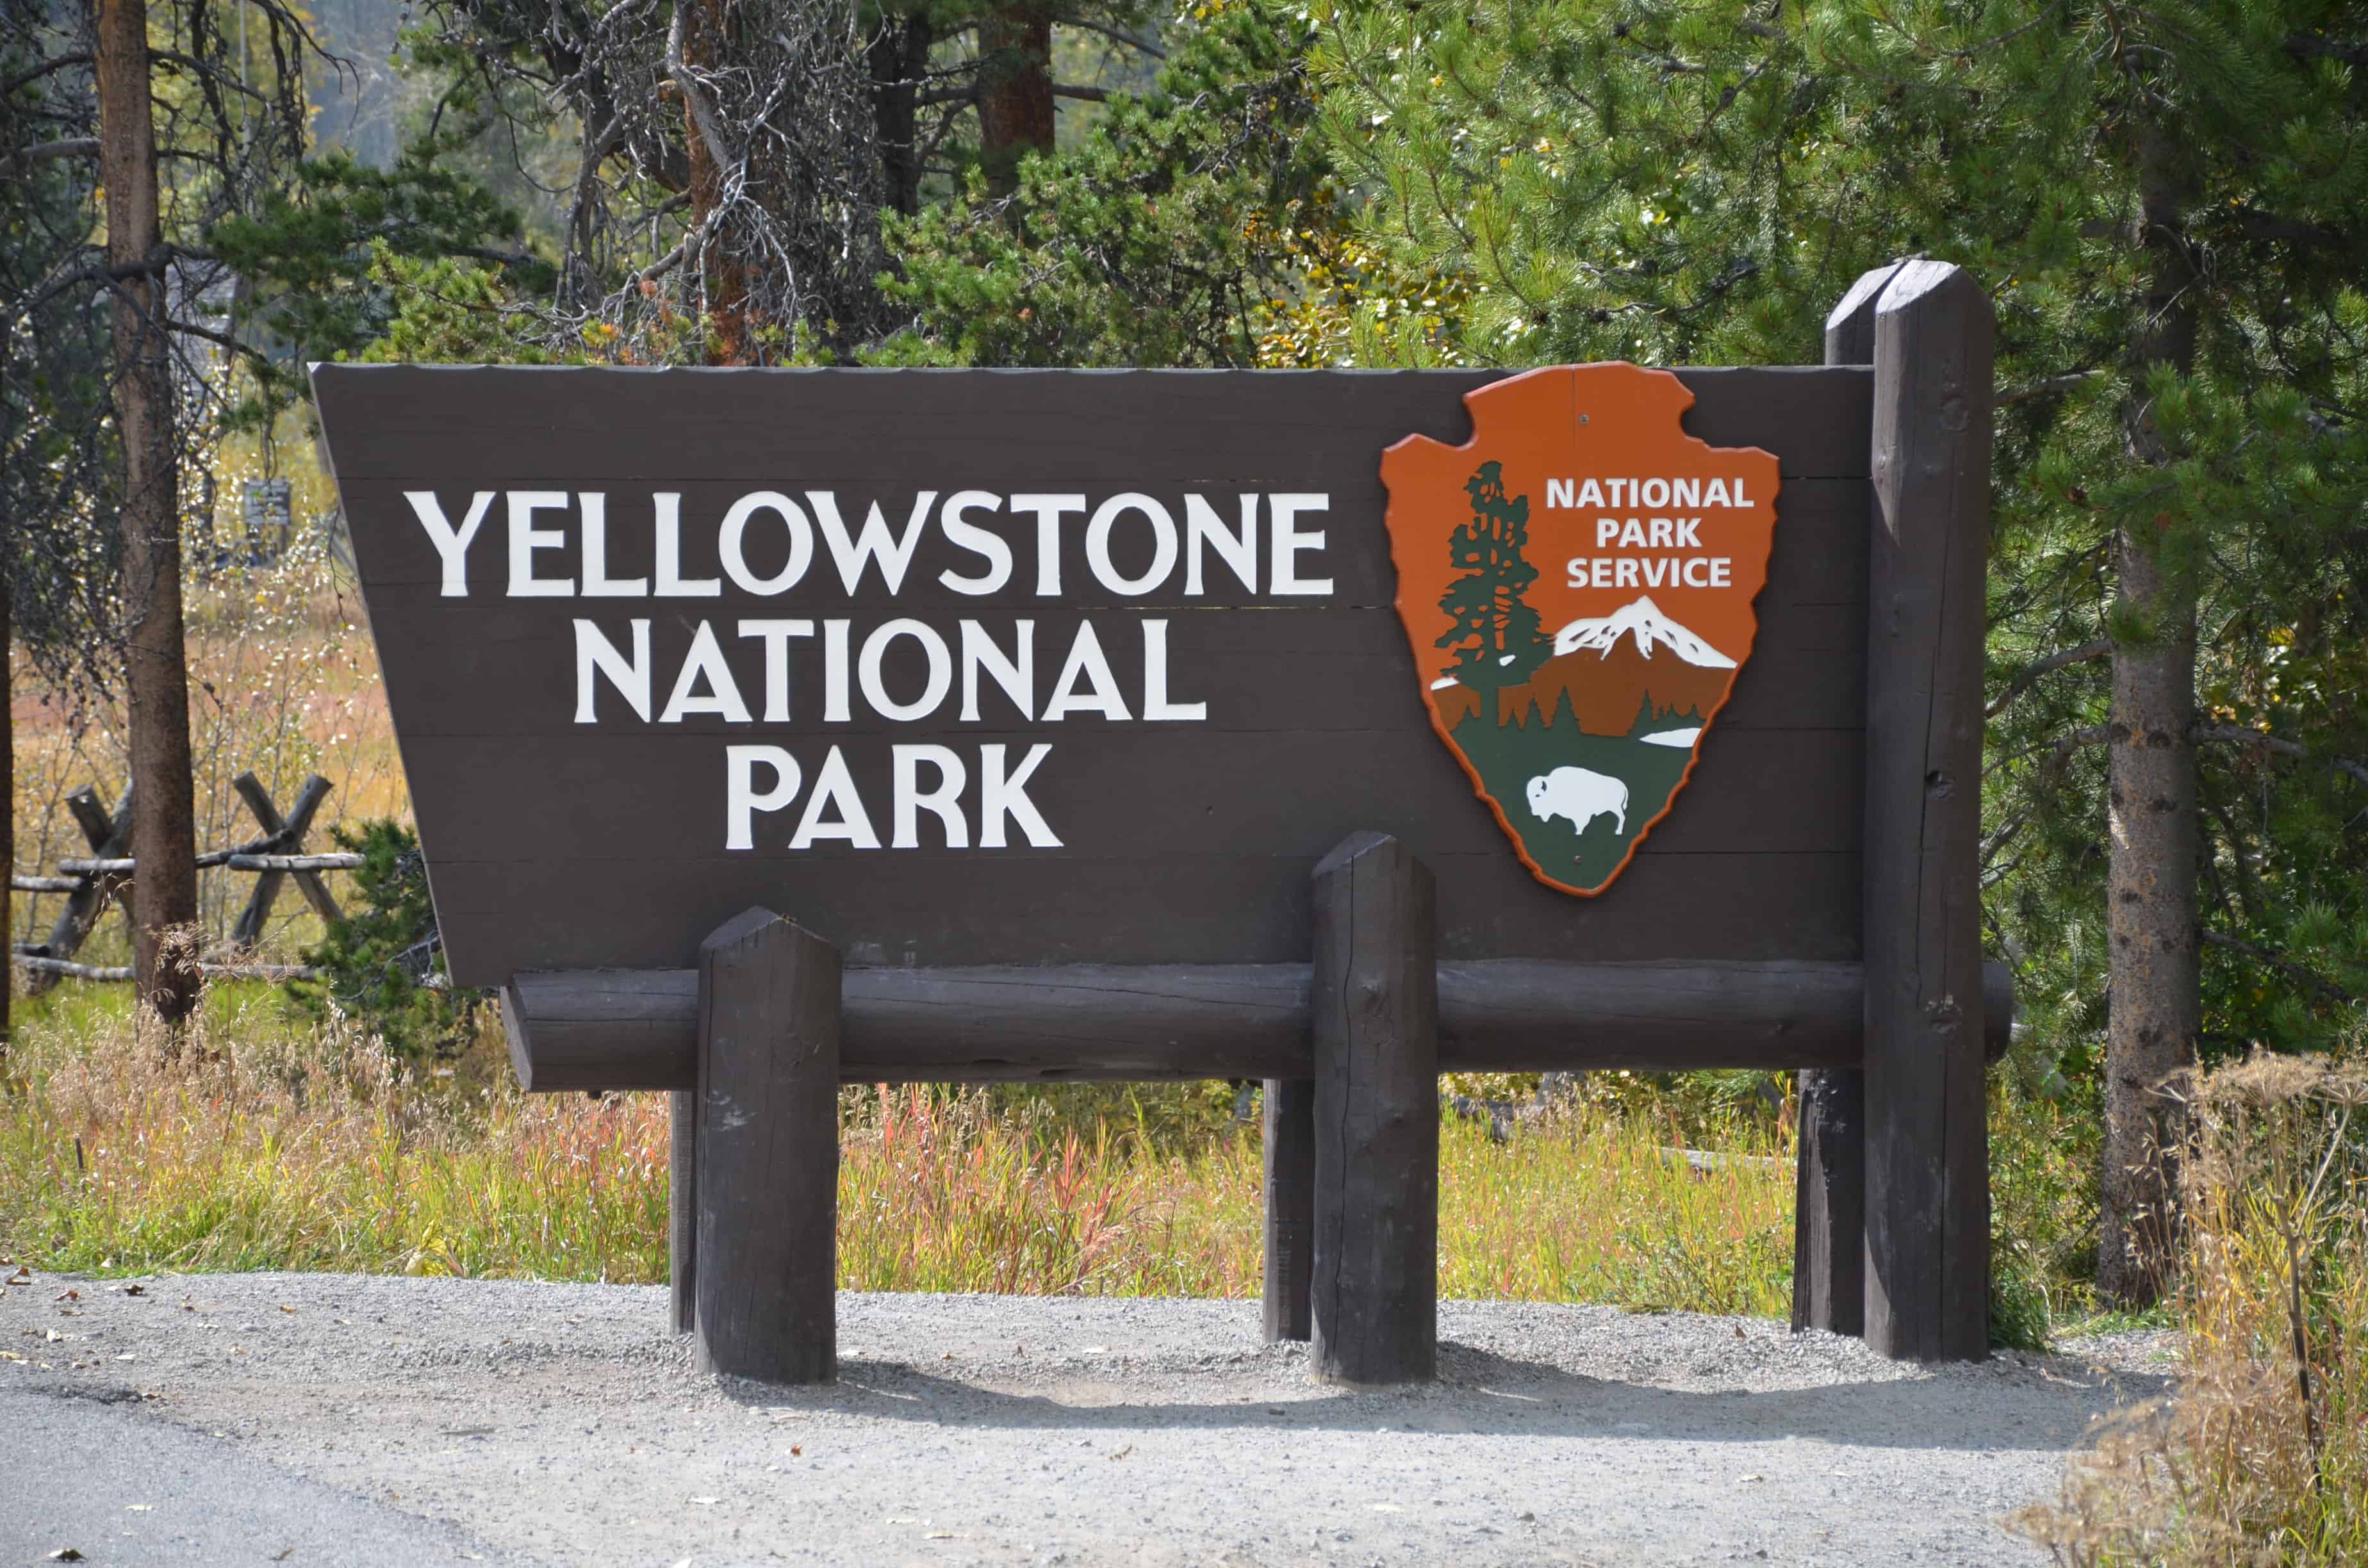 Yellowstone National Park entrance sign in Wyoming